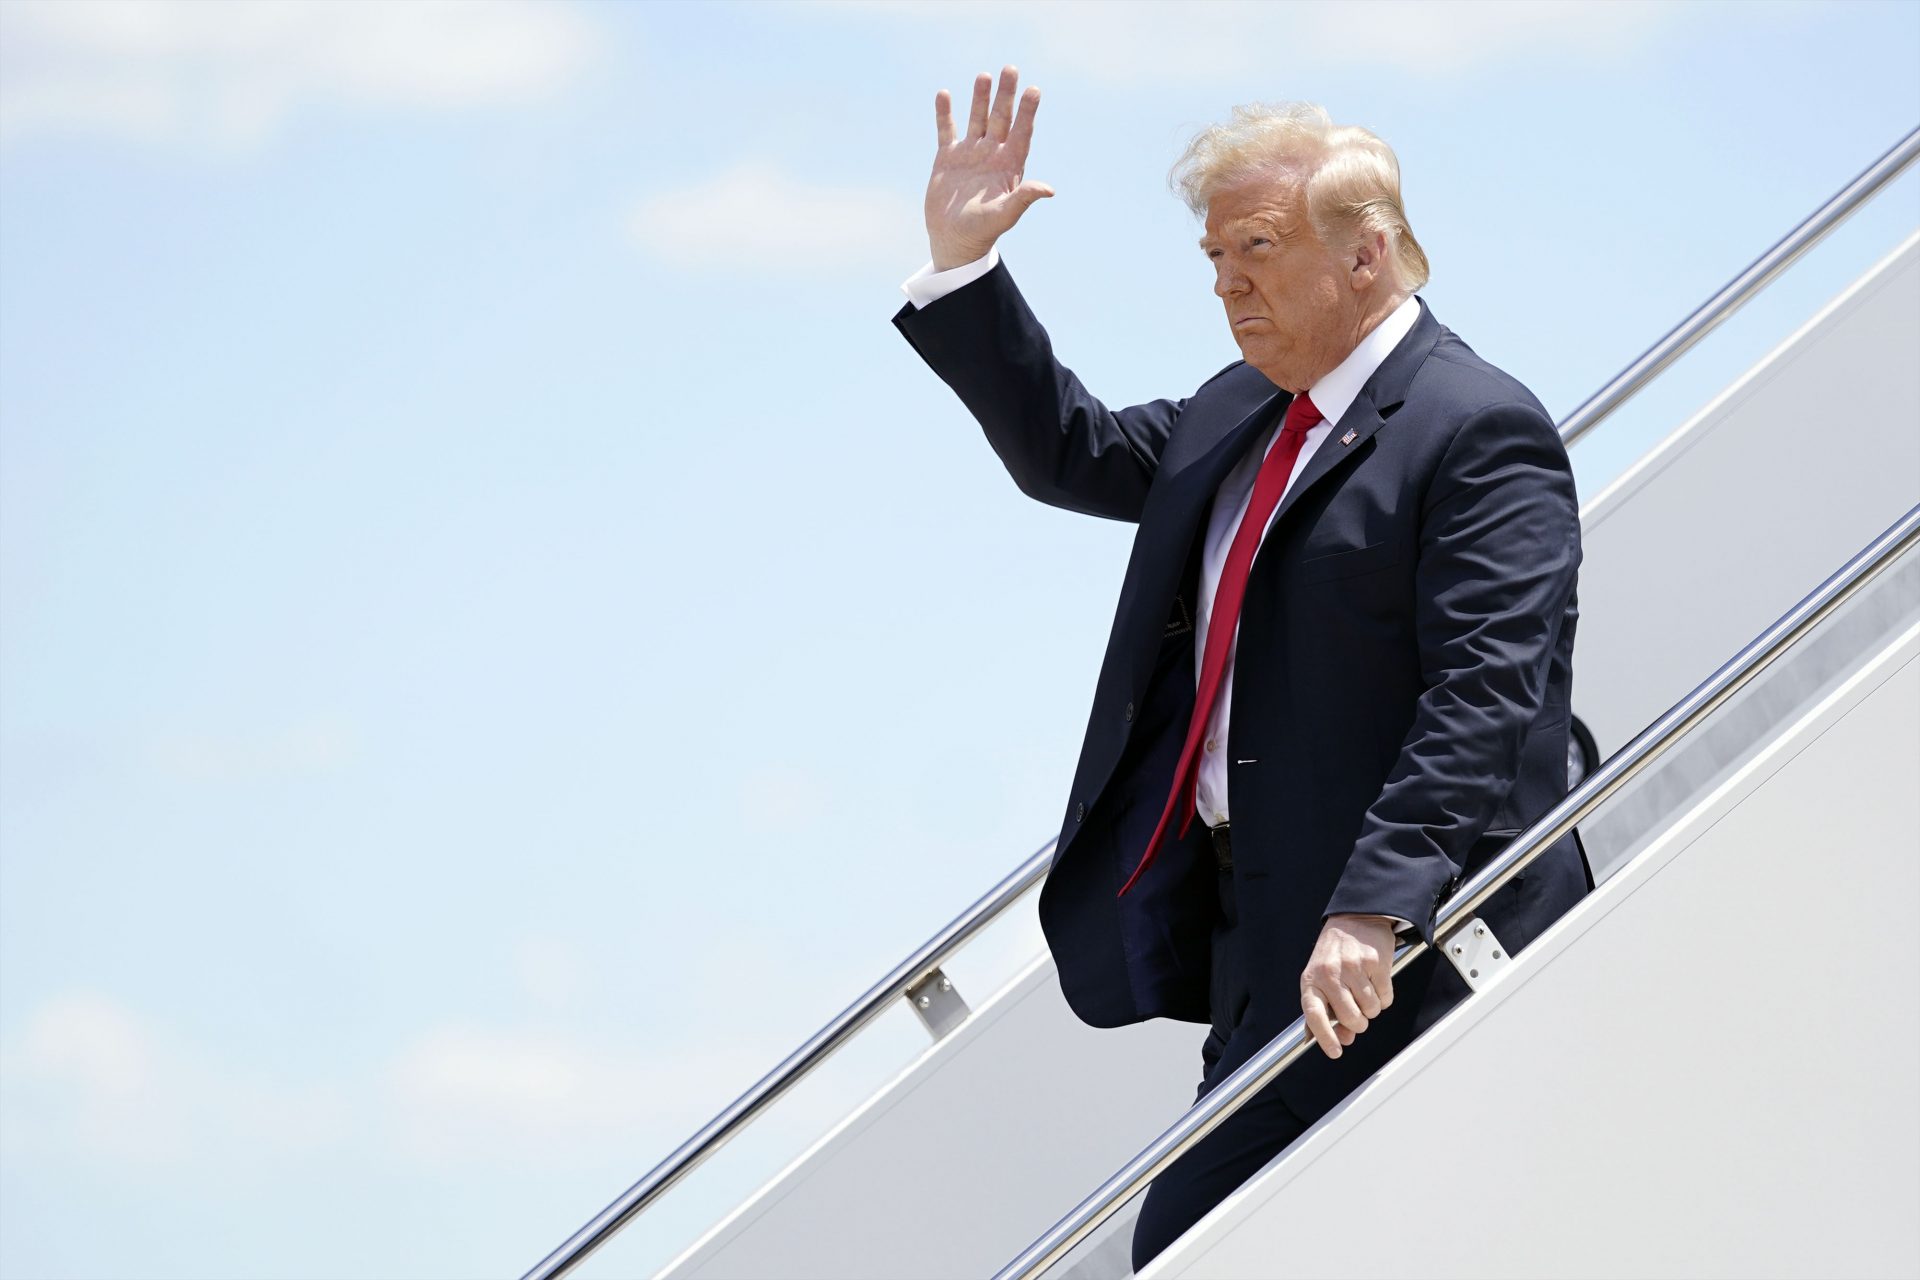 President Donald Trump waves as he arrives on Air Force One at Austin Straubel International Airport in Green Bay, Wis., Thursday, June 25, 2020.